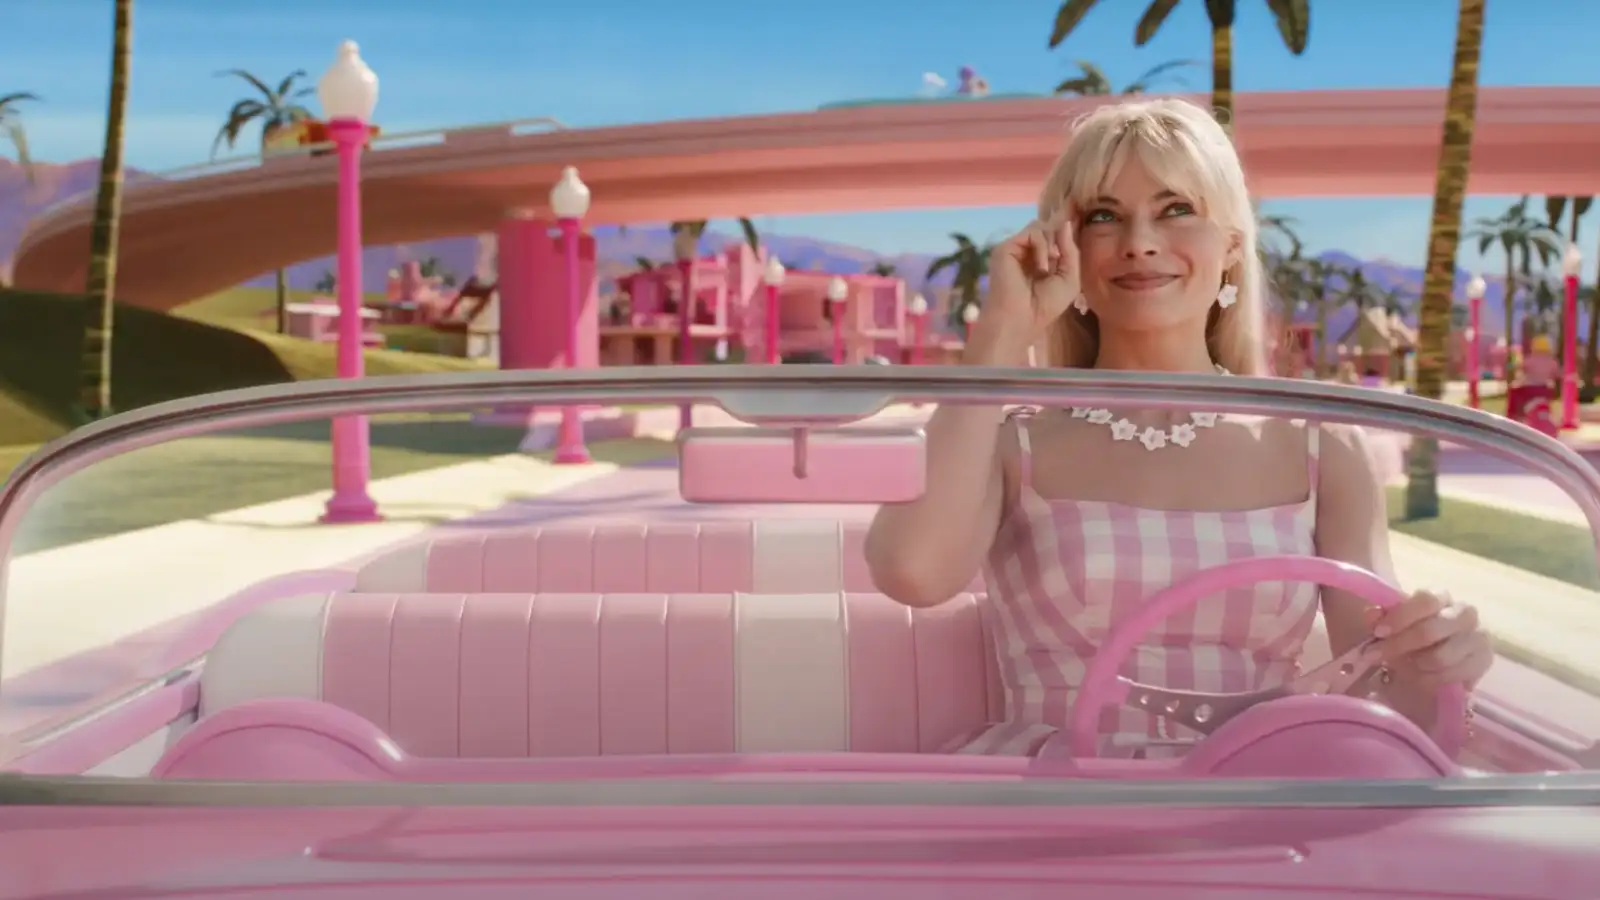 Barbie: After Margot Robbie and Ryan Gosling, new characters join in; Check new posters | PINKVILLA